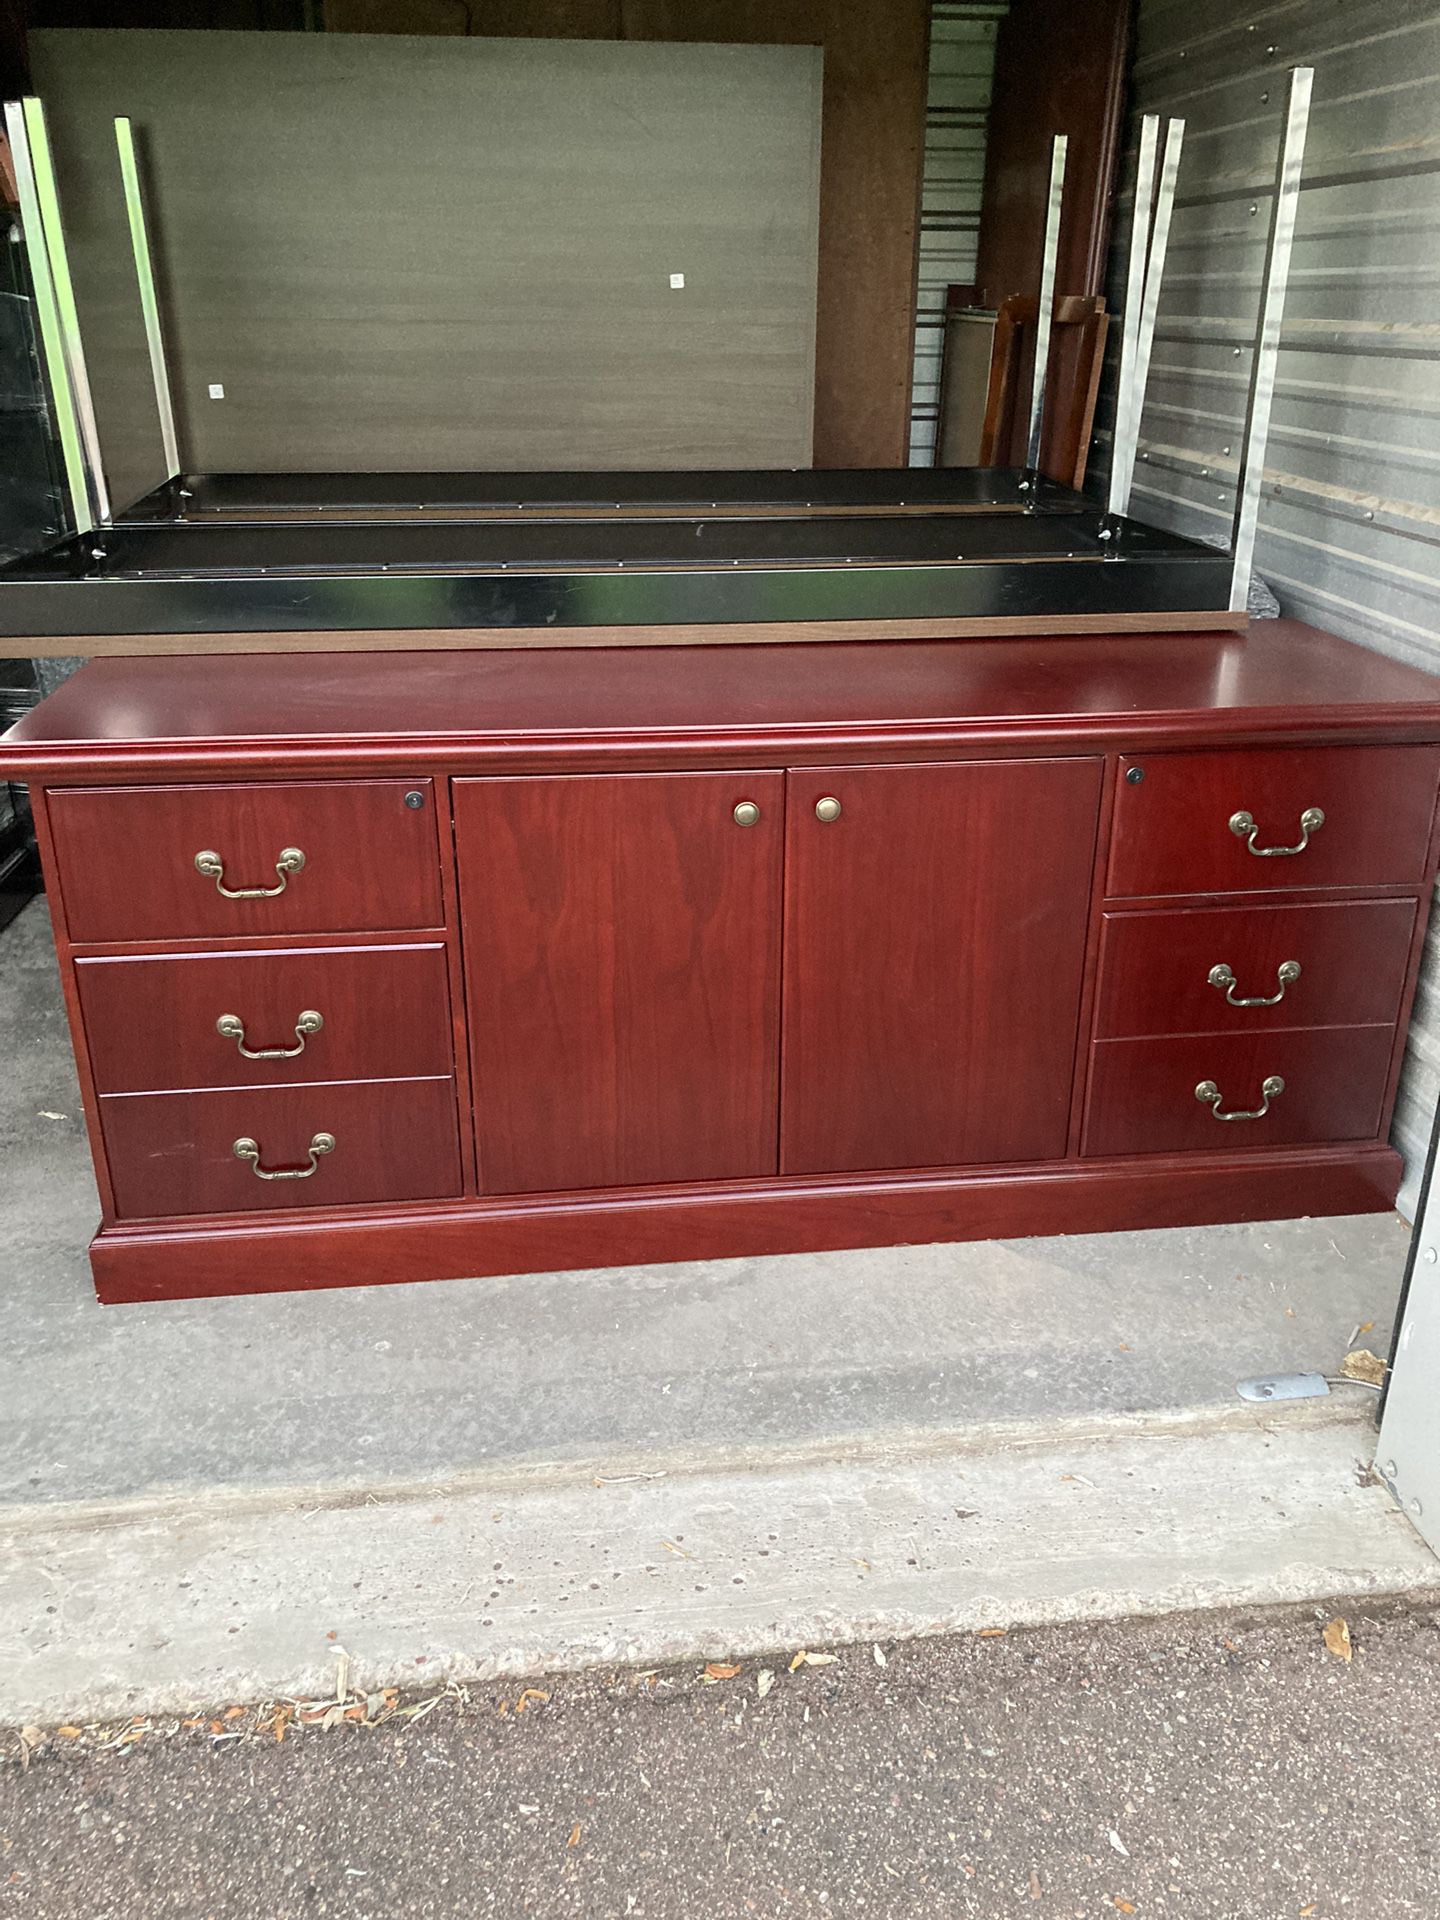 Solid Cherry Wood Cabinet